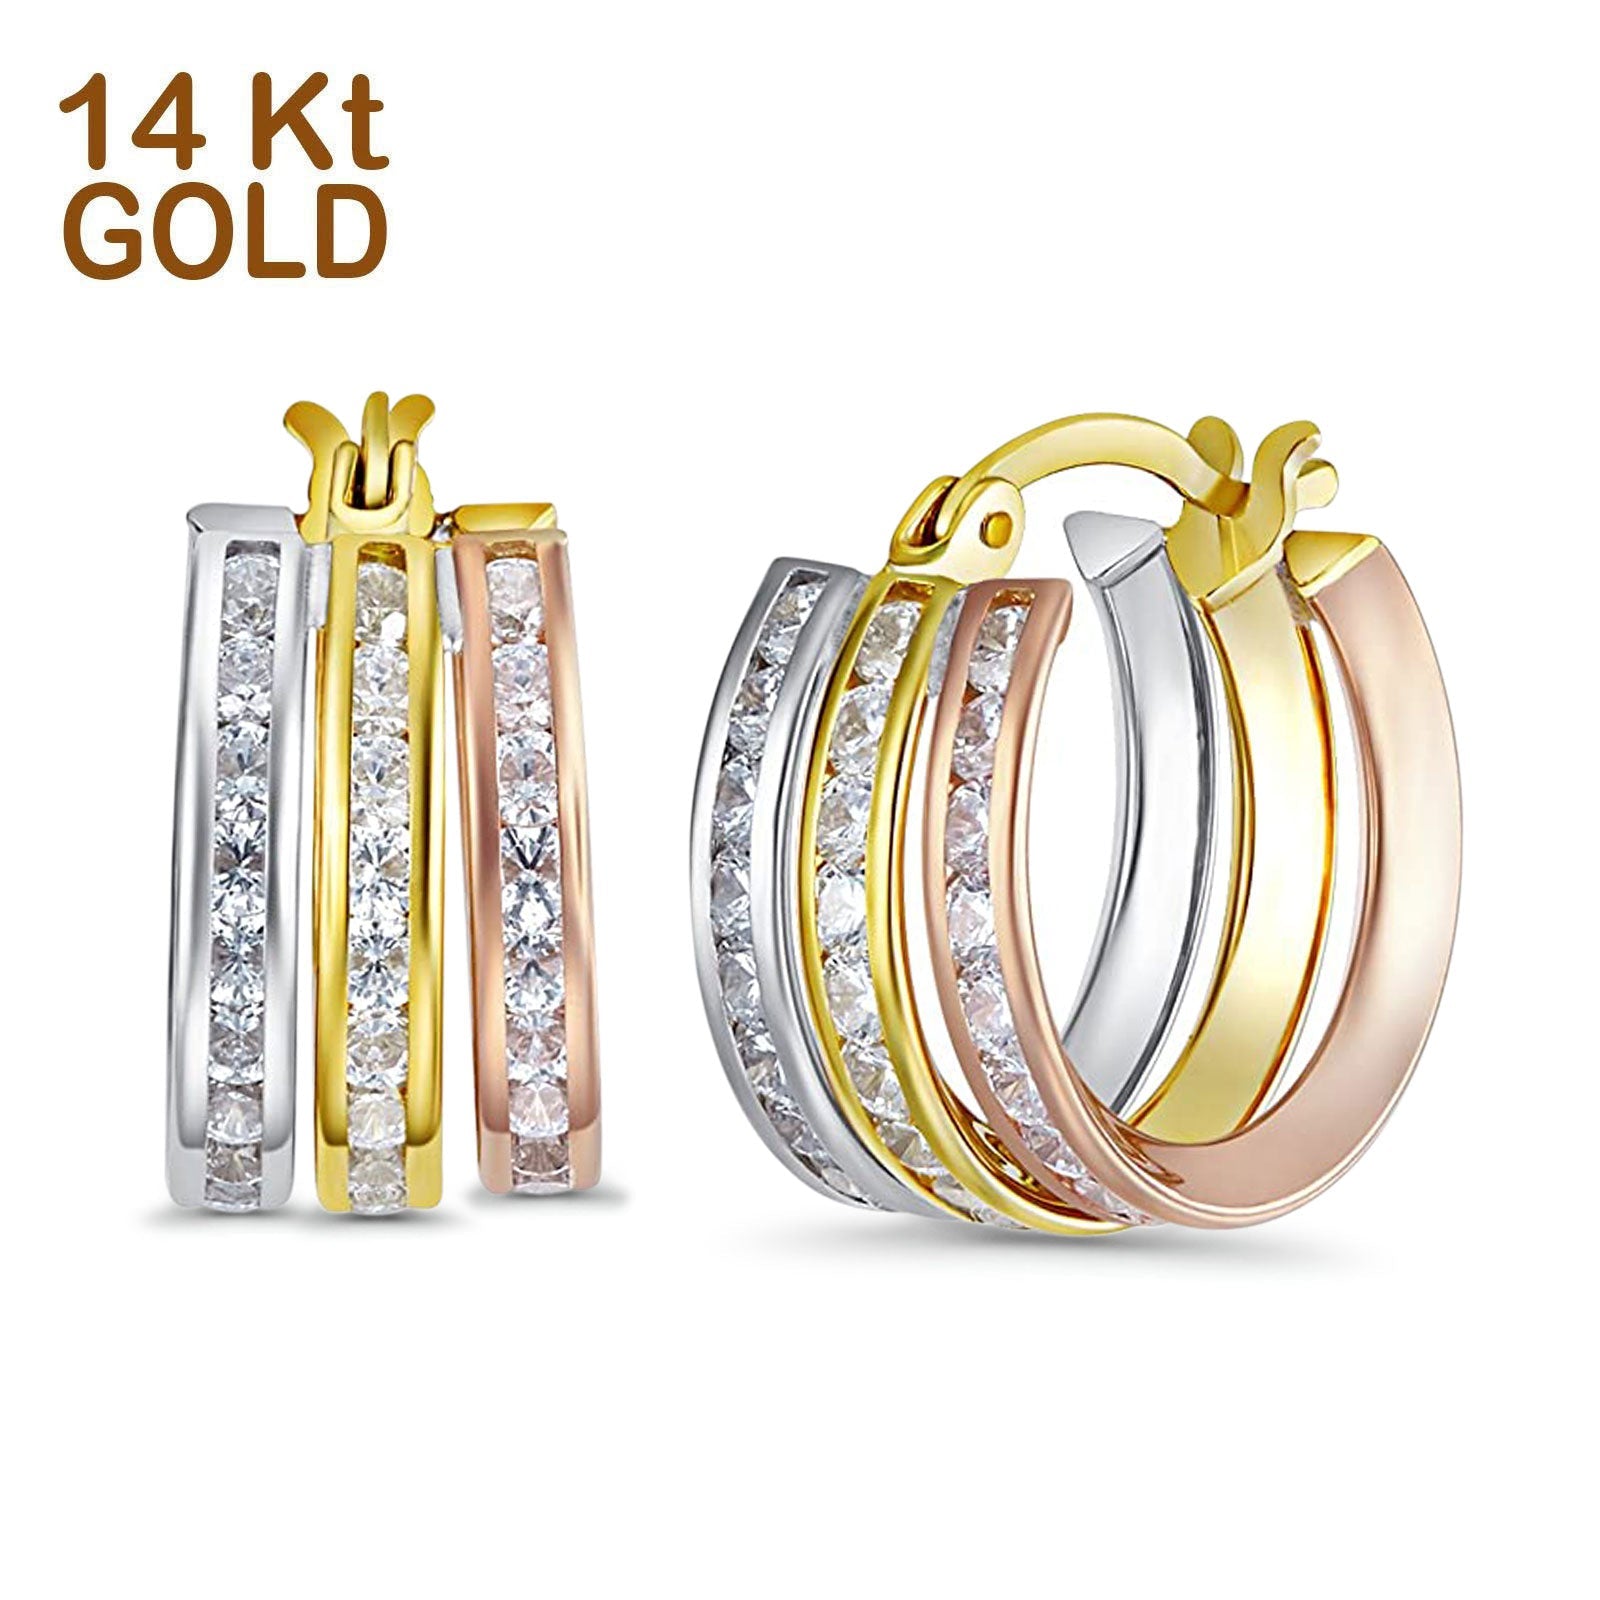 14K Tri Color Gold Round CZ Hoop Huggie Earrings - Best Birthday Gift for Her